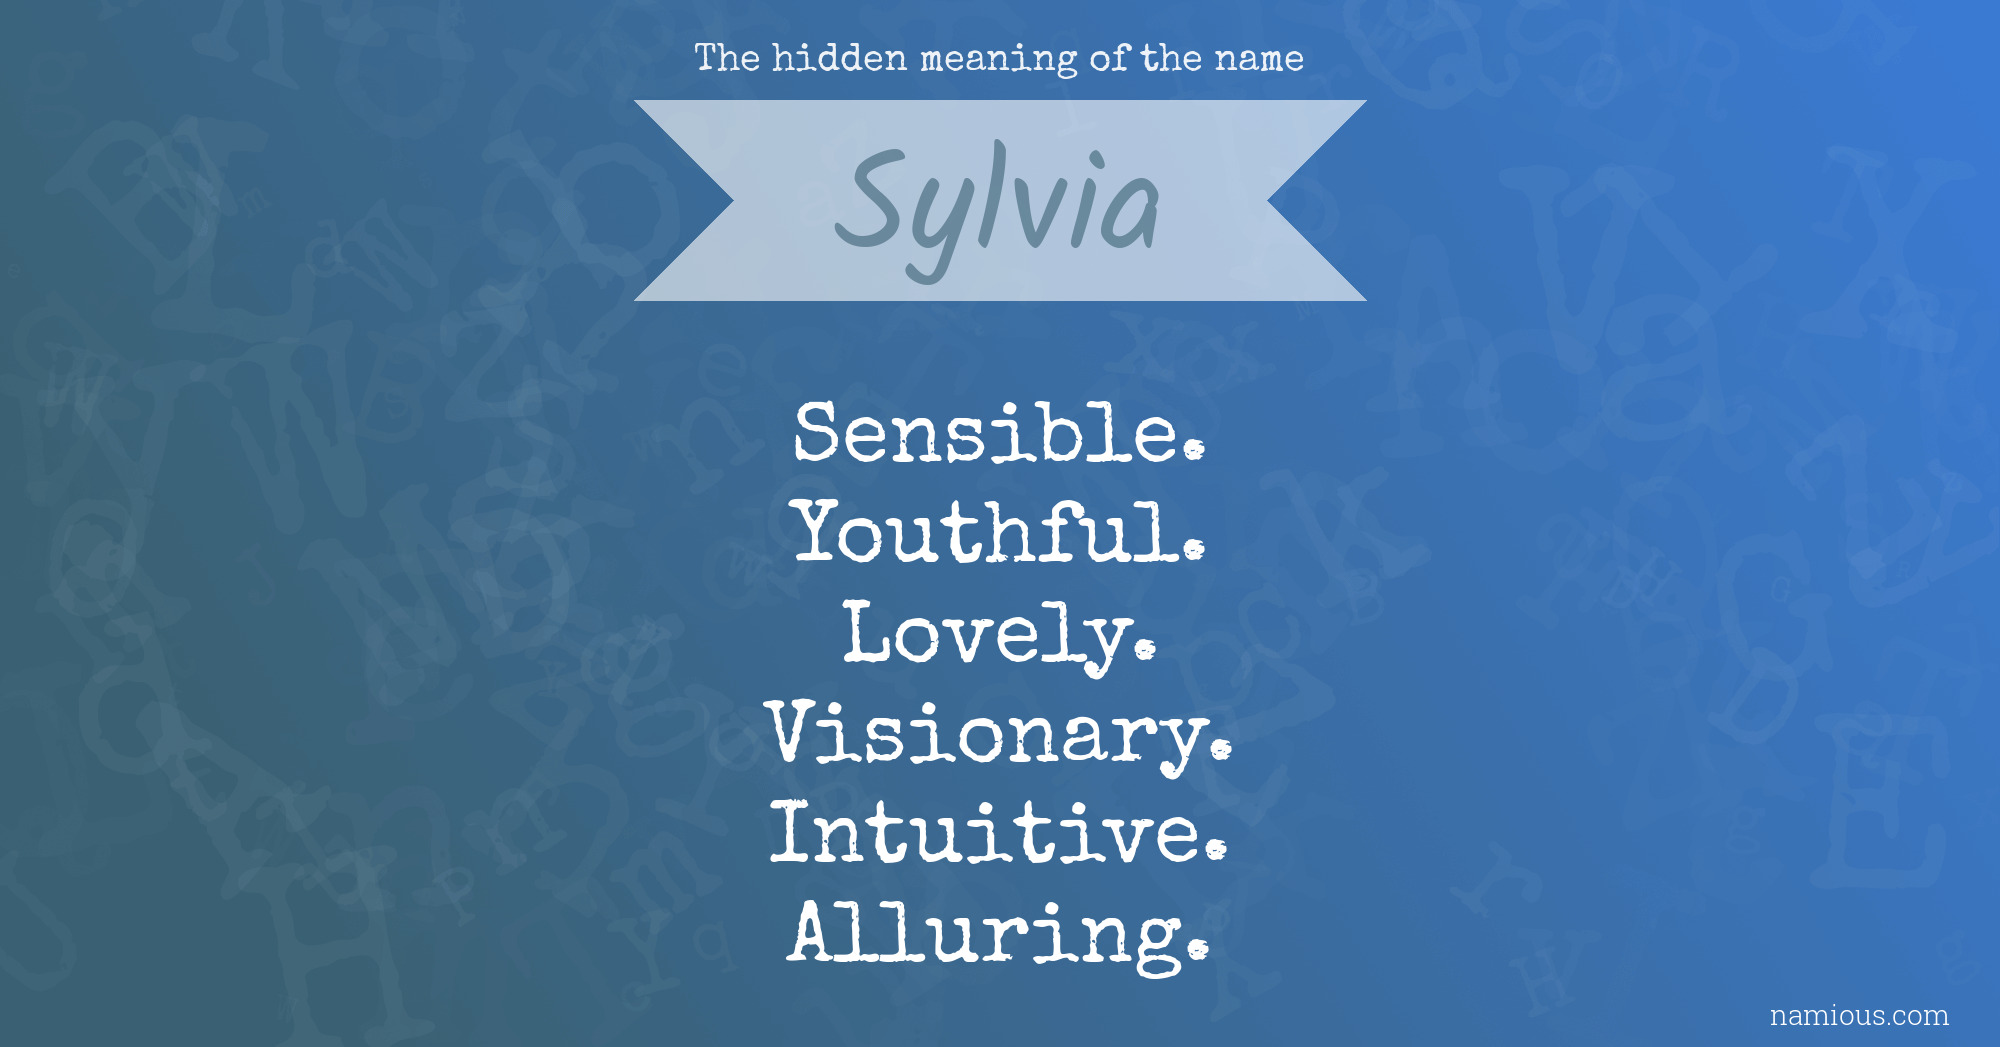 The hidden meaning of the name Sylvia